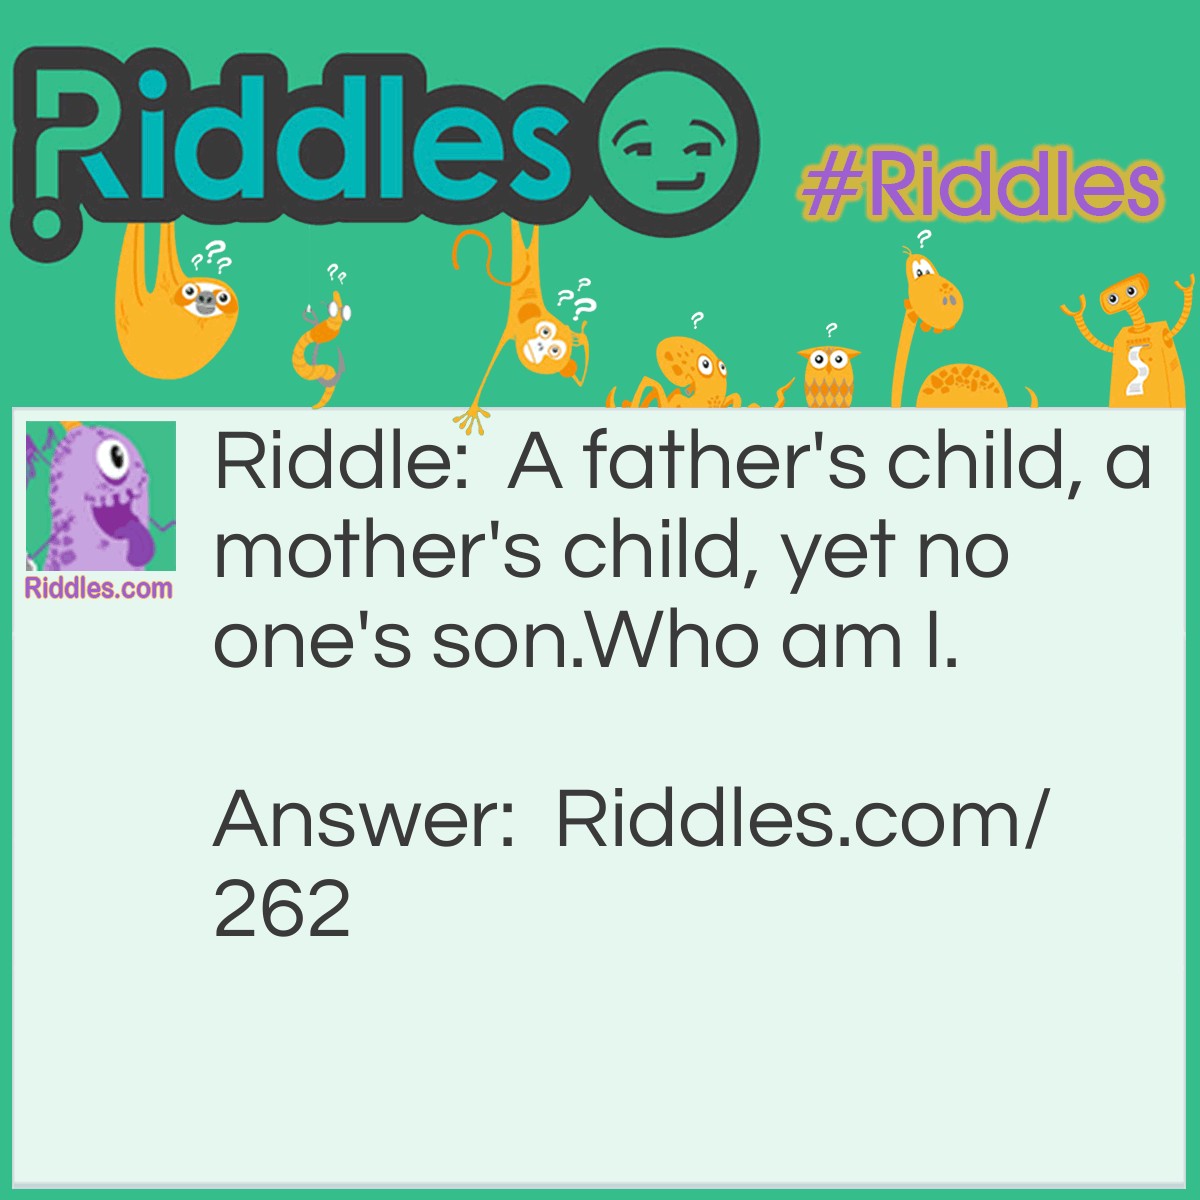 Riddle: A father's child, a mother's child, yet no one's son. Who am I. Answer: I'm their daughter.